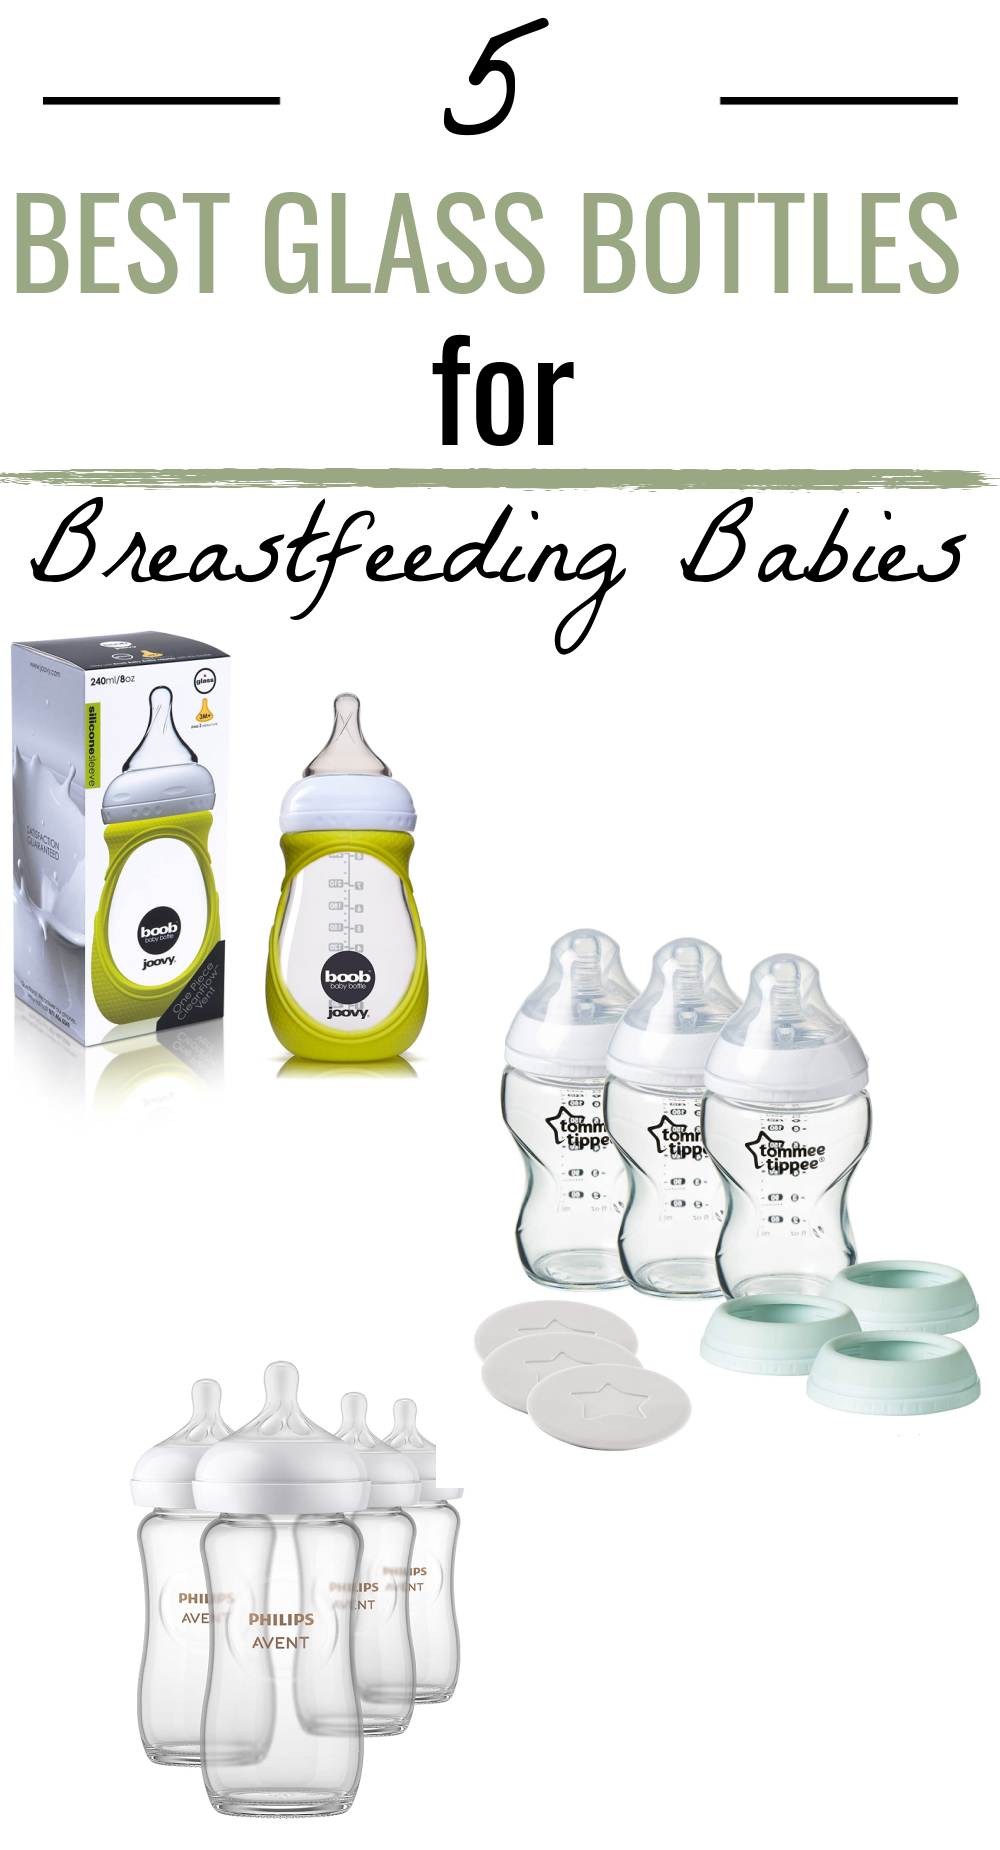 Does your breastfed baby also take a bottle? One thing you'll want to avoid is having them prefer the bottle over the breast and there are some amazing bottles out there that are created to mimic the nipple and breast. Glass bottles are becoming more and more popular and for good reason- they are also perfect for breastfed babies!